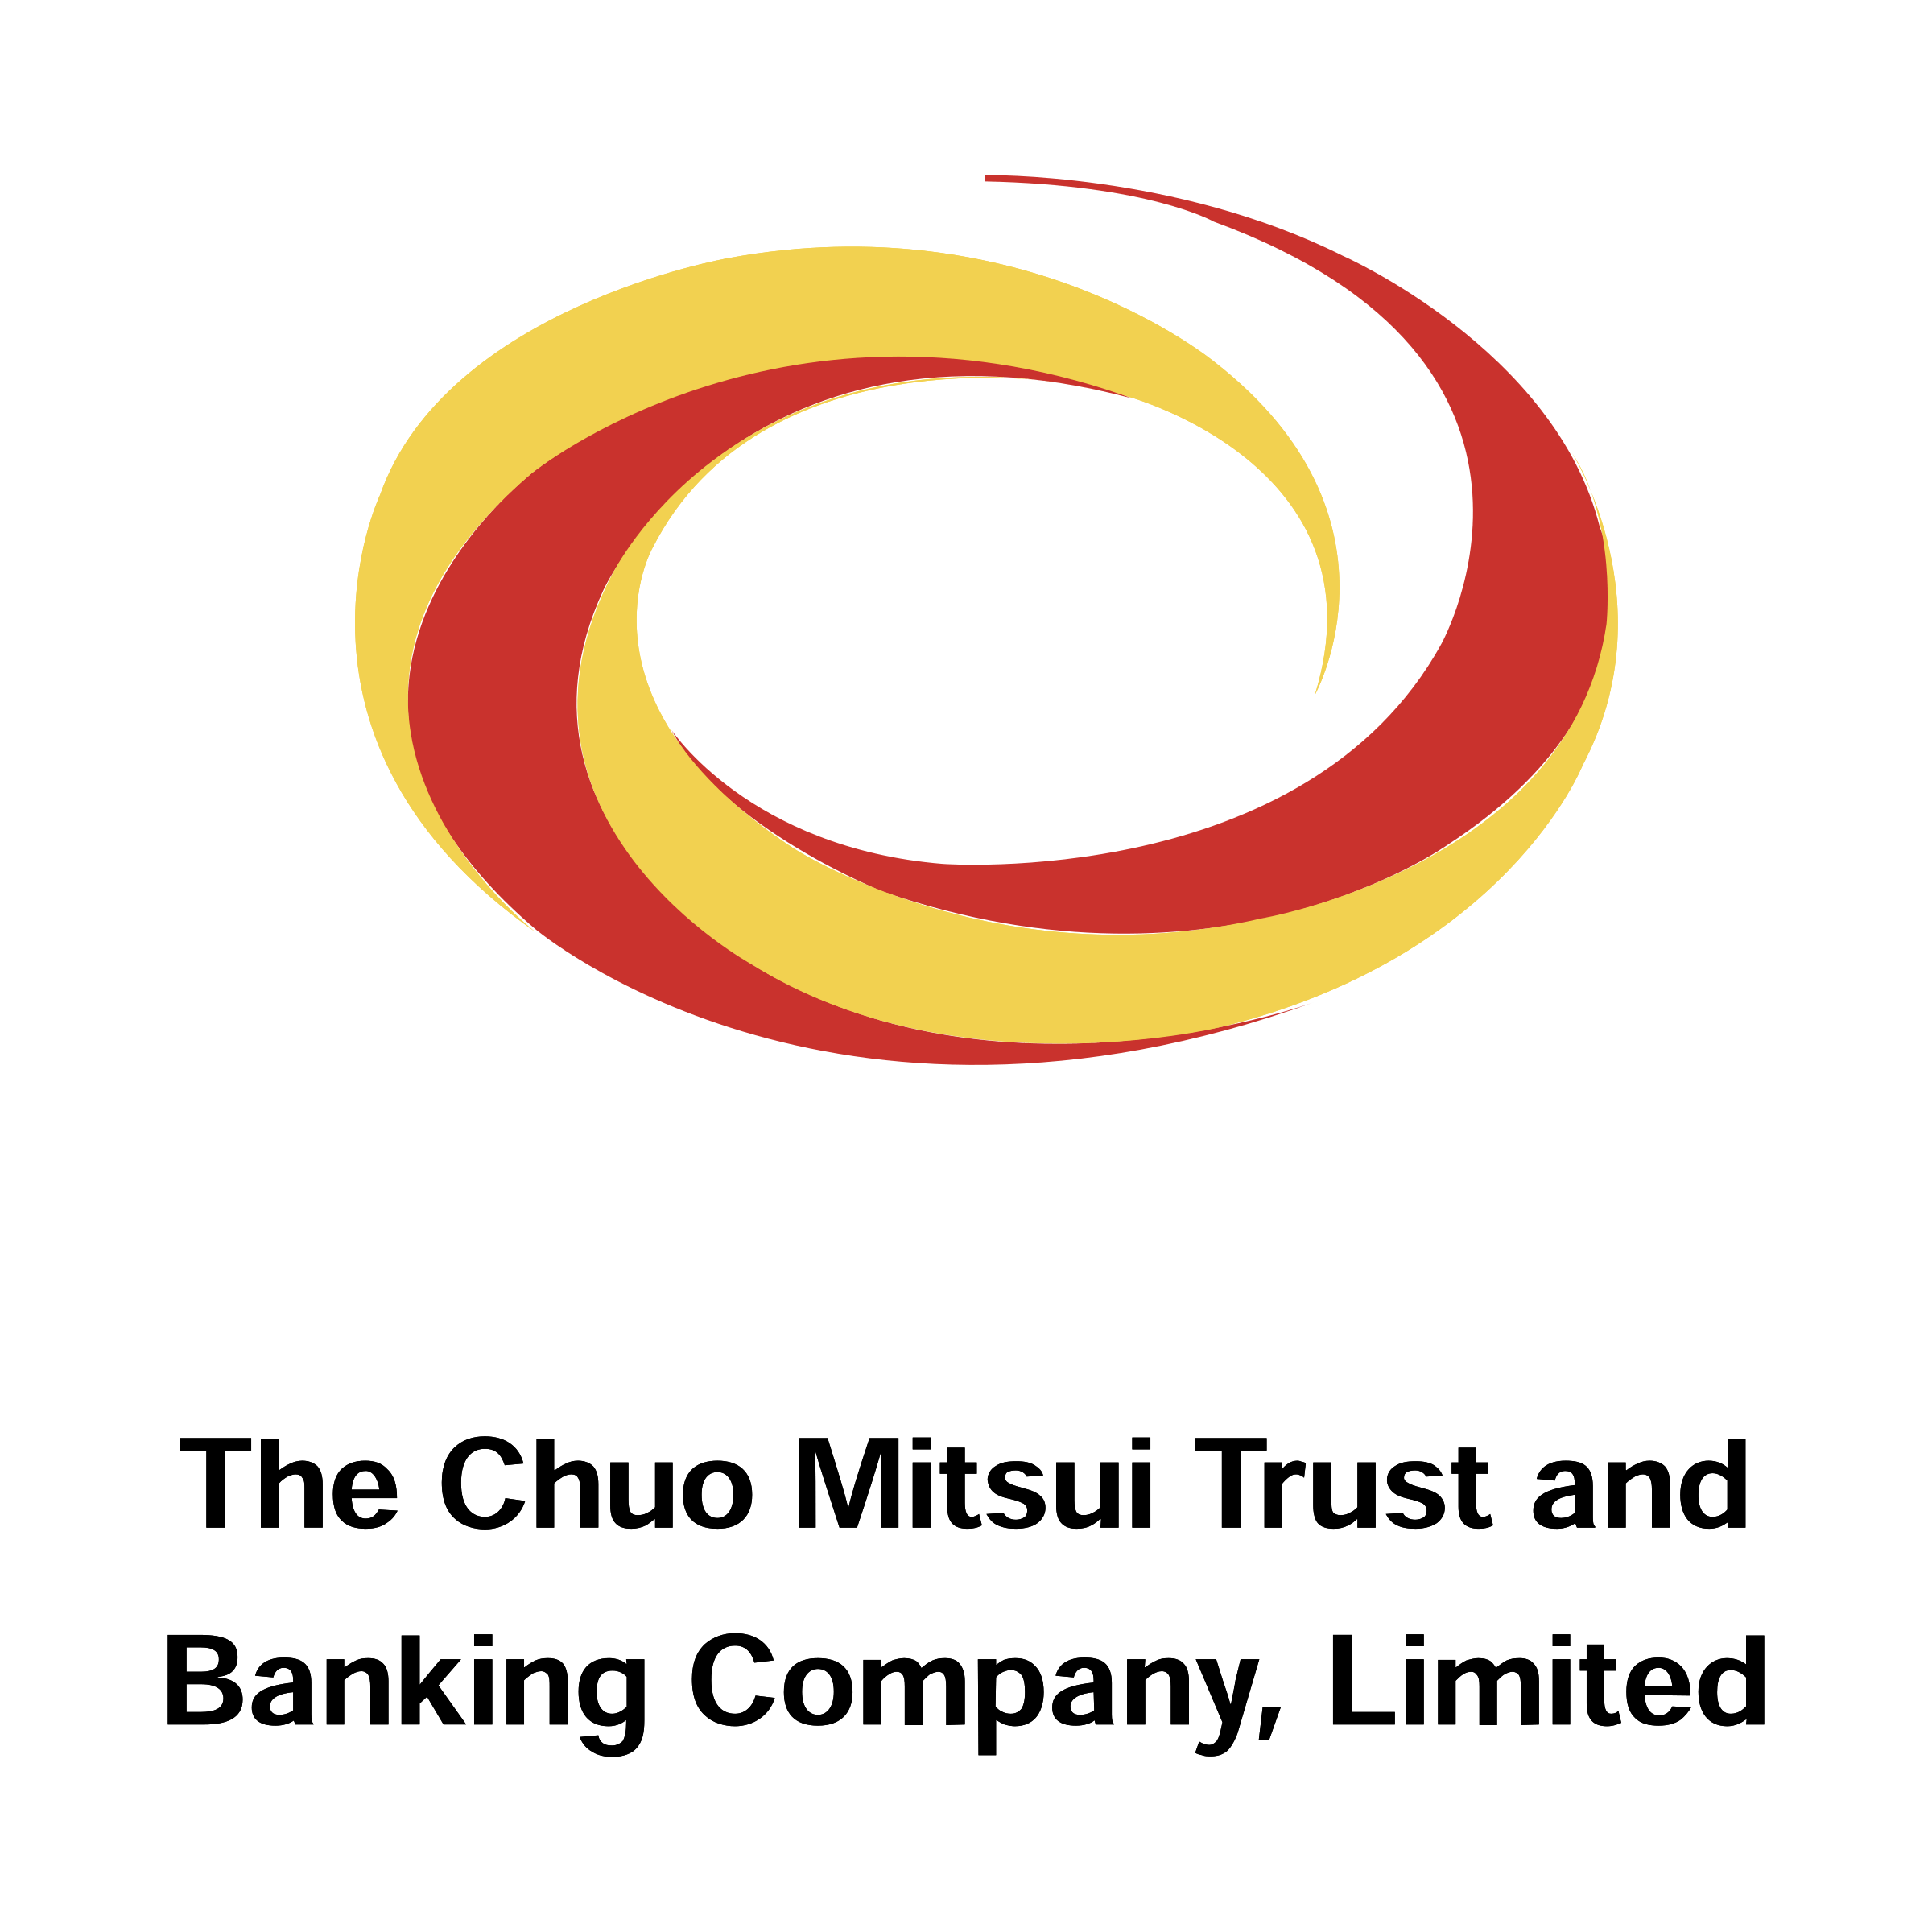 Mitzui Logo - The Chuo Mitsui Trust and Banking Company Logo PNG Transparent & SVG ...